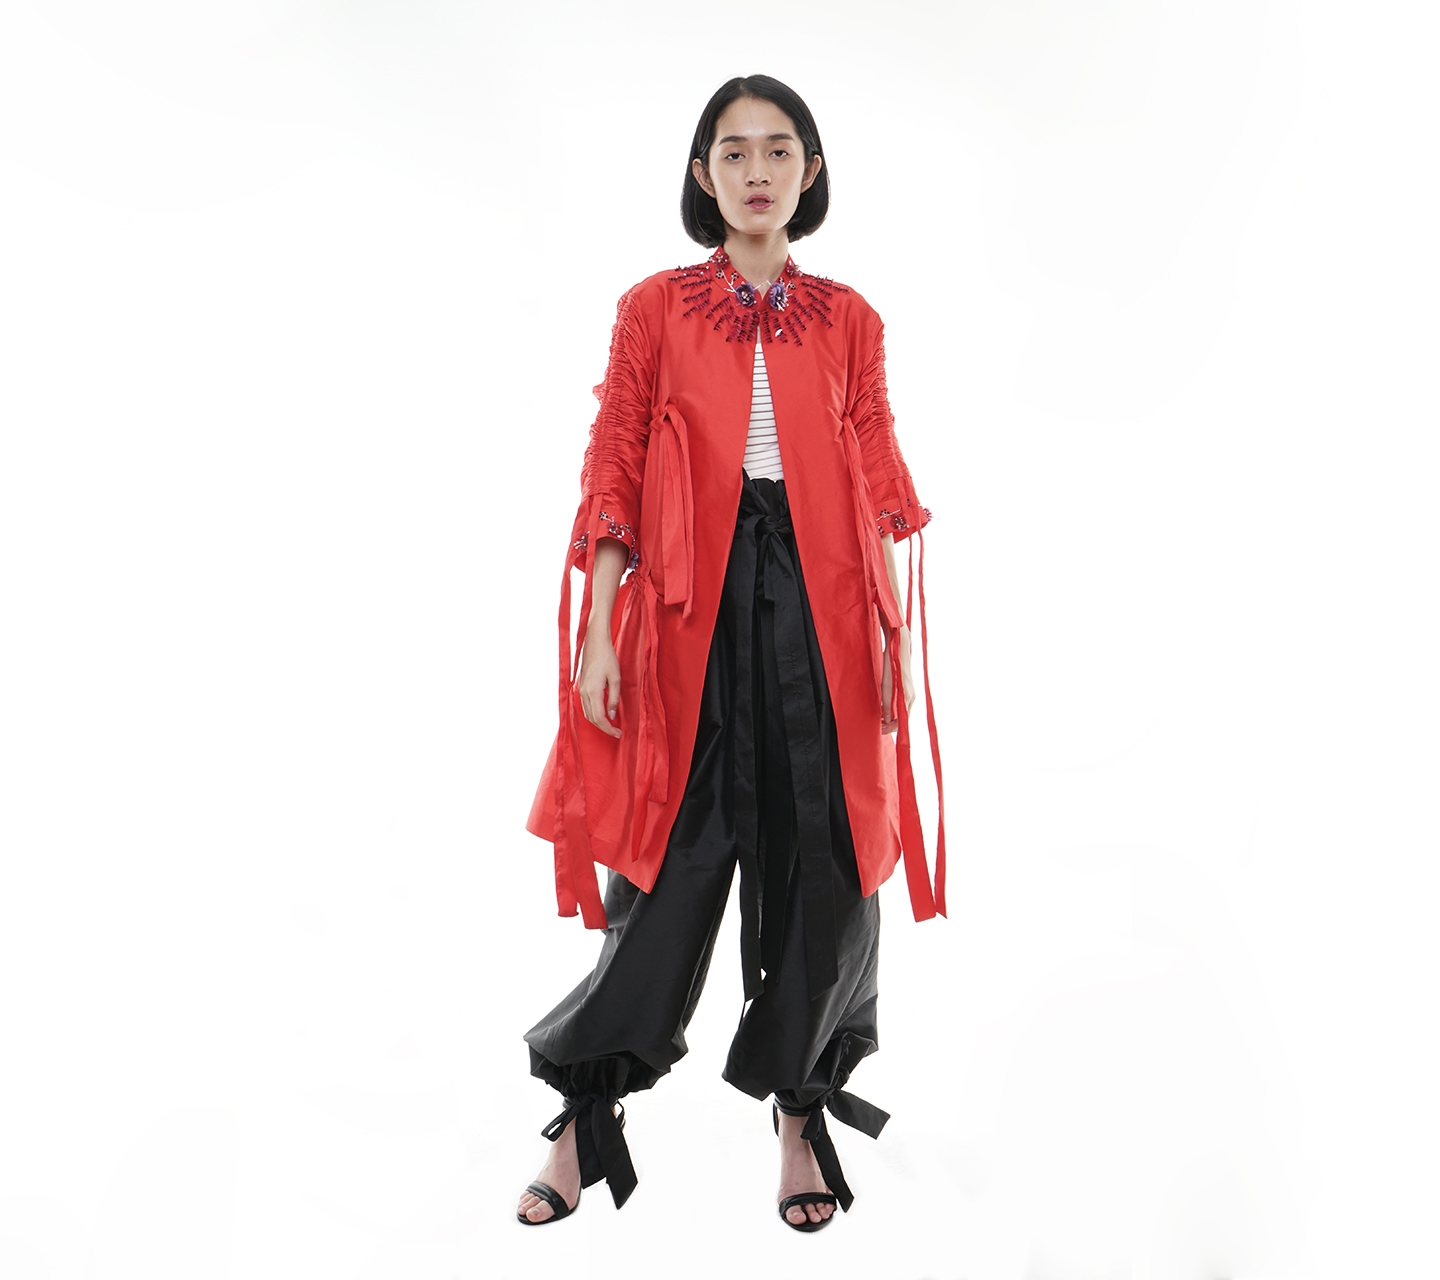 Sebe11as Red with Beads Outerwear